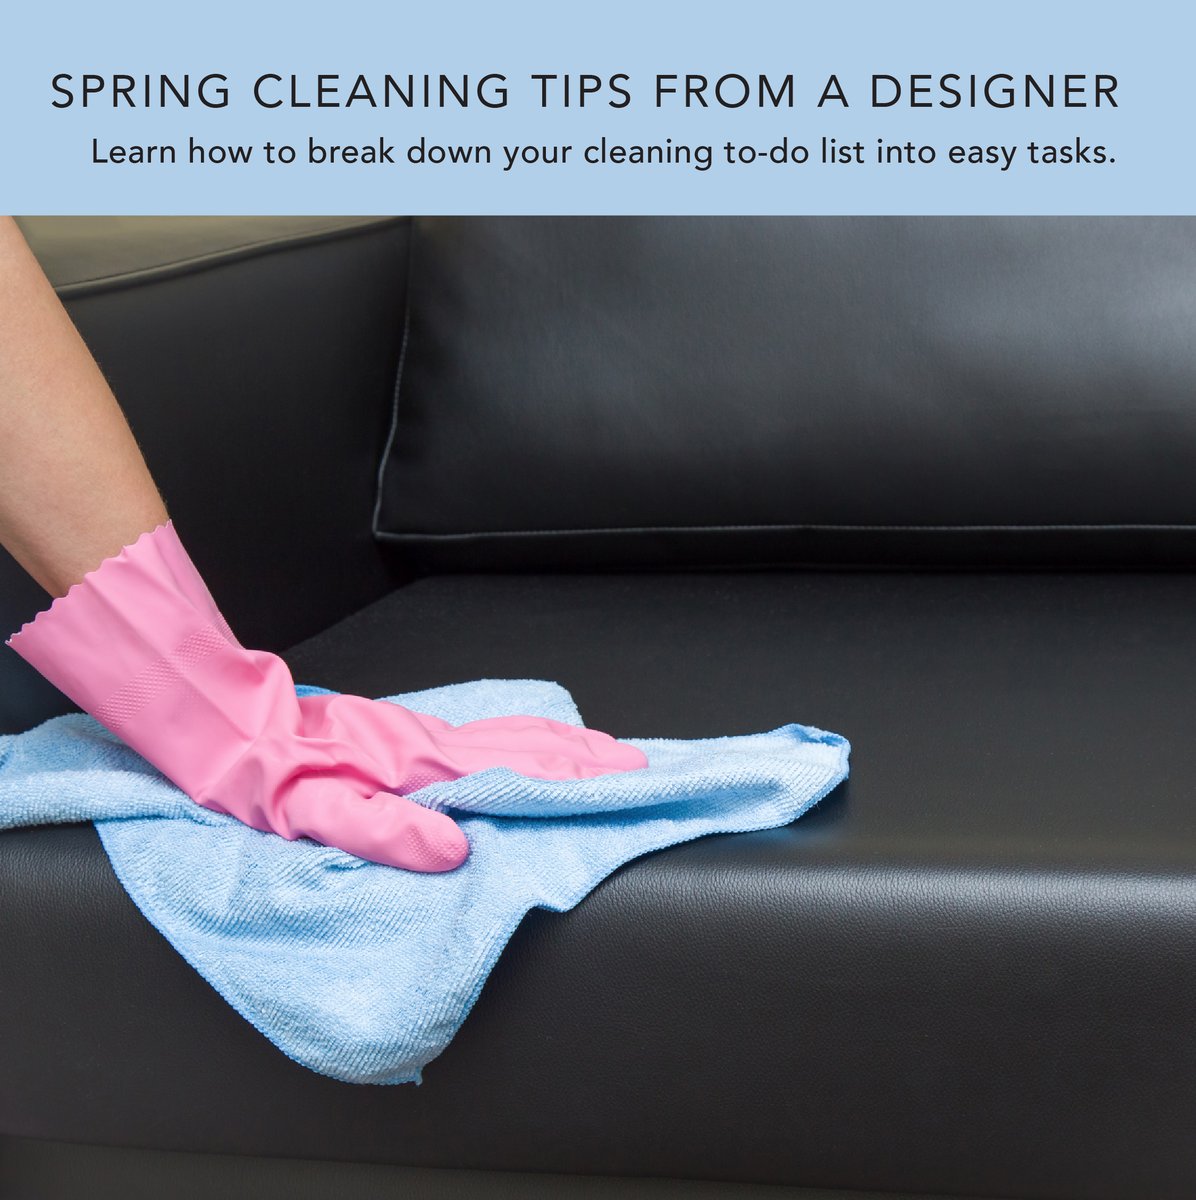 Gabberts Blog:  Spring Cleaning Tips from a Designer 🧹🧽
Follow these strategies for spring cleaning, including creating specific goals.
bit.ly/4axovfH
#gabberts #gabbertsfurniture #finefurniture #furniturebydesign #designstyle